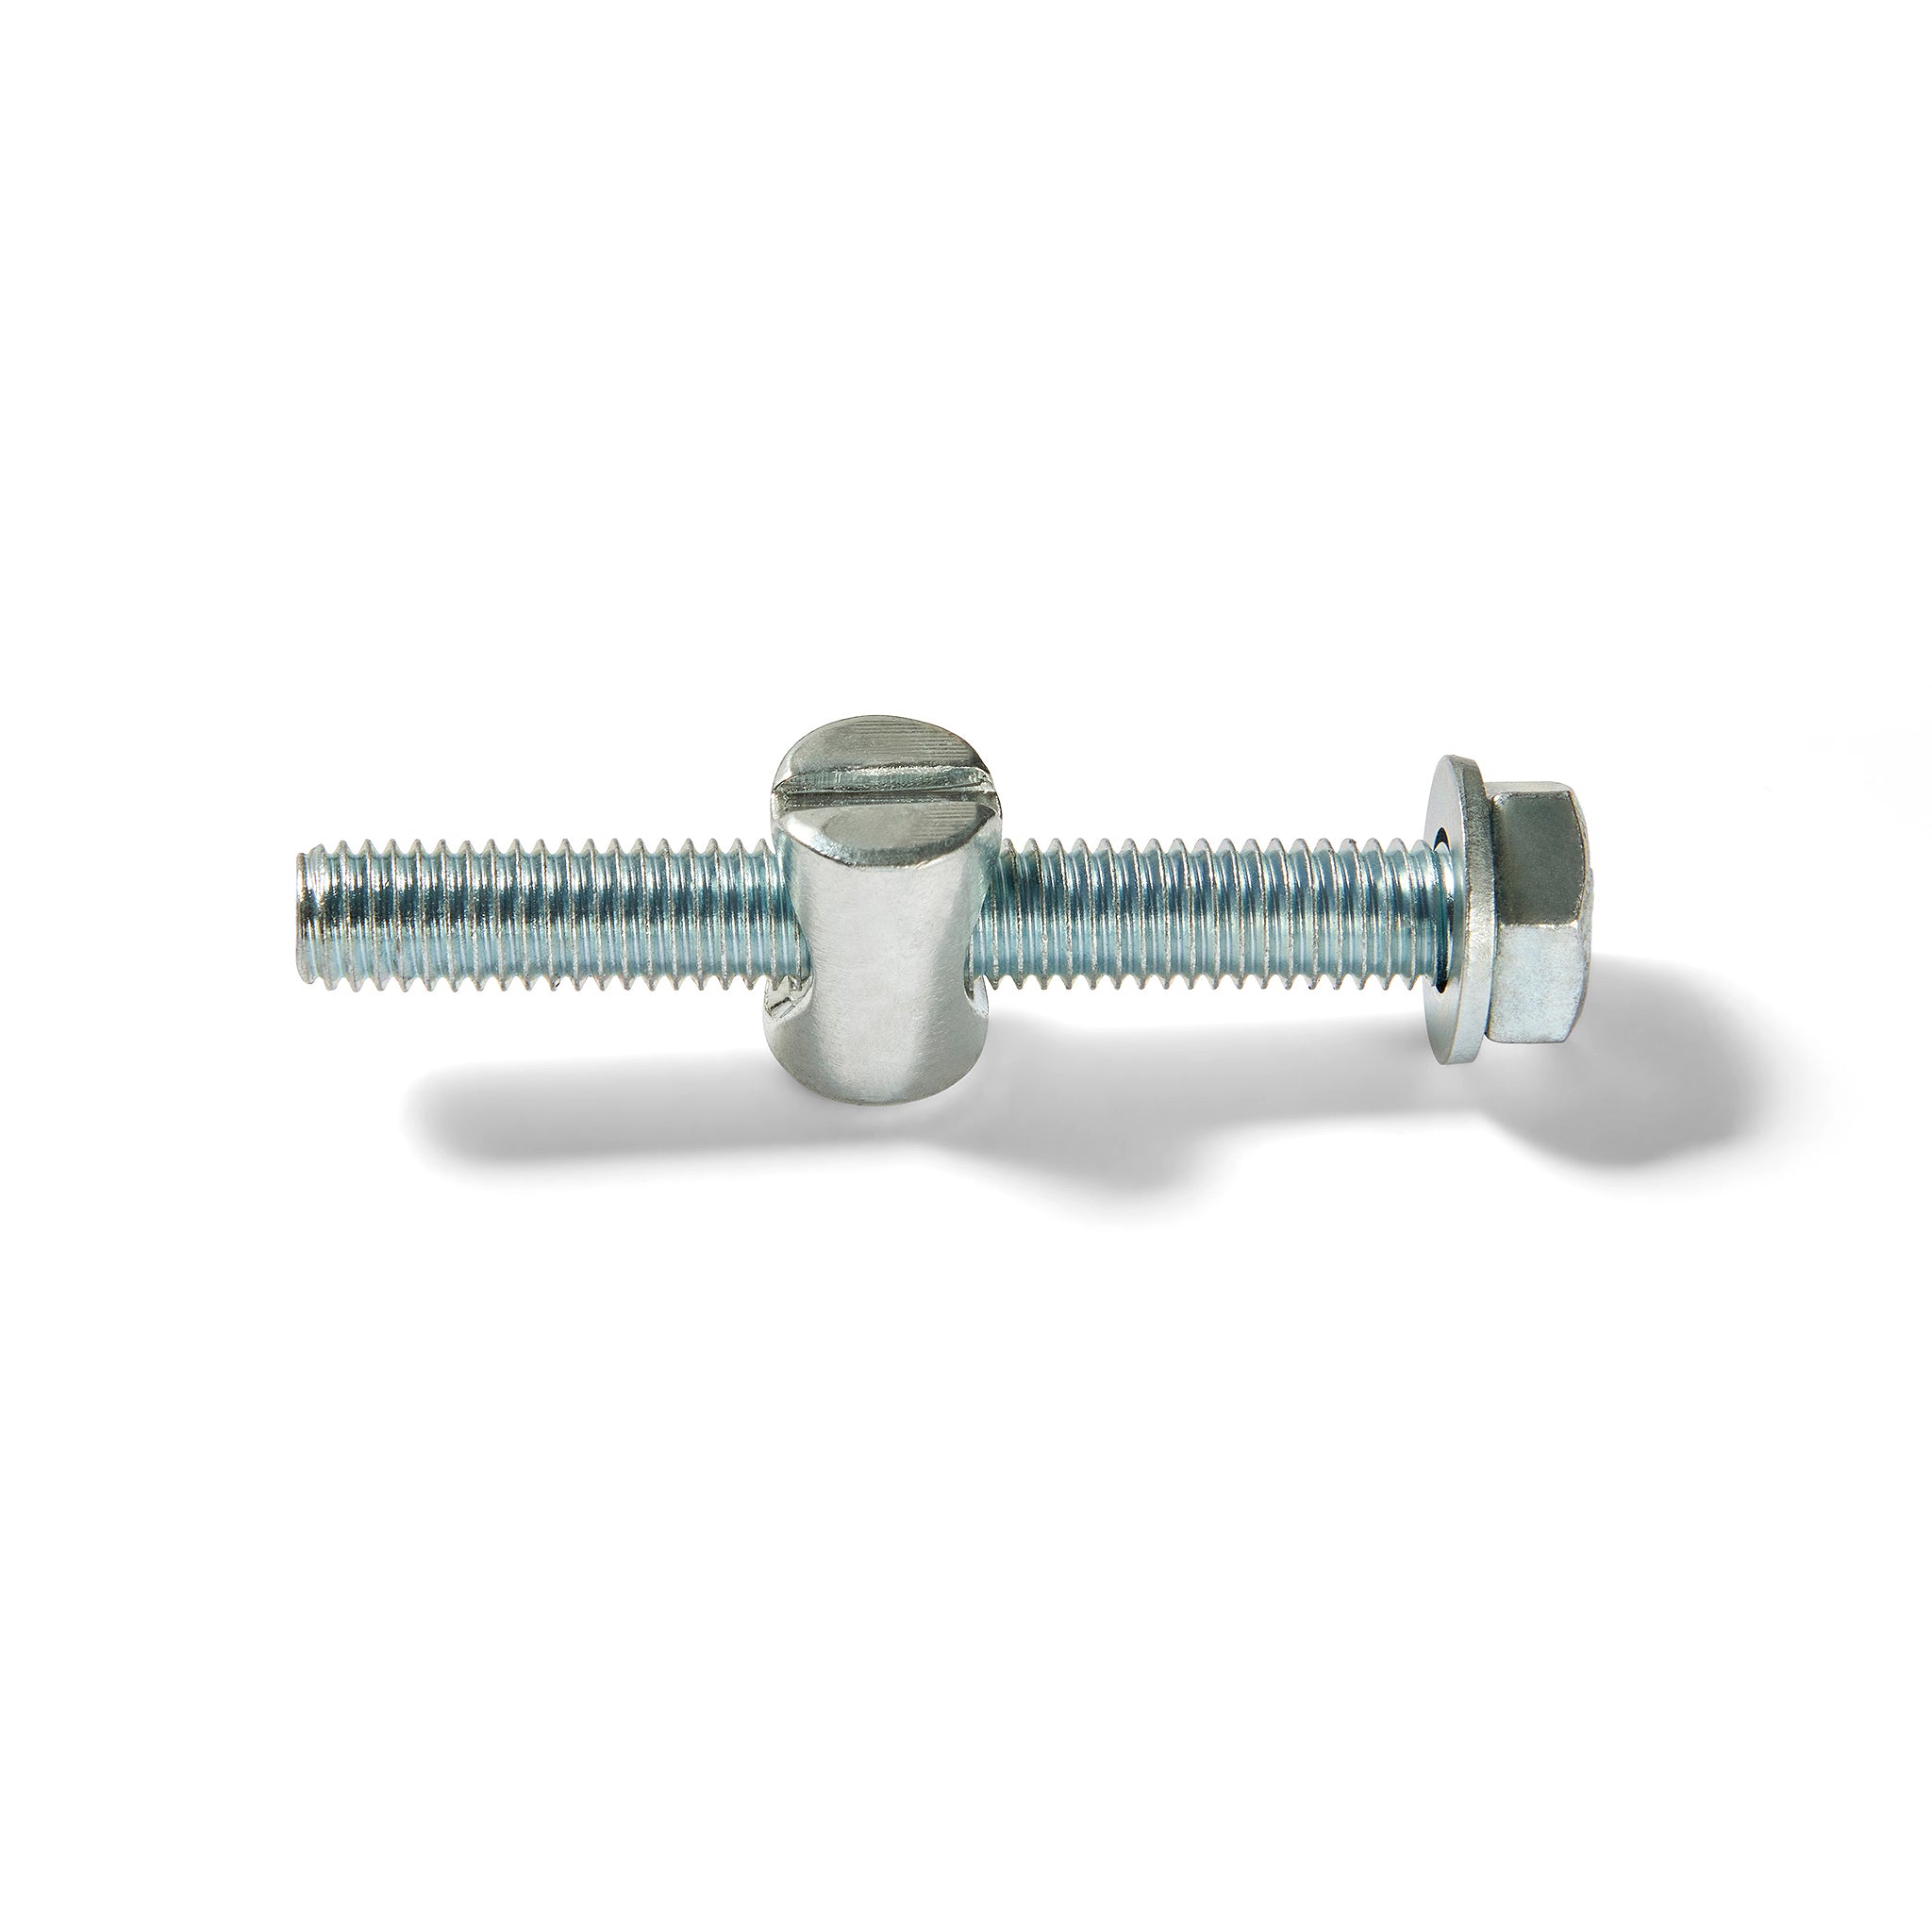 Cross Dowels and Connector Bolts - Pack of 30